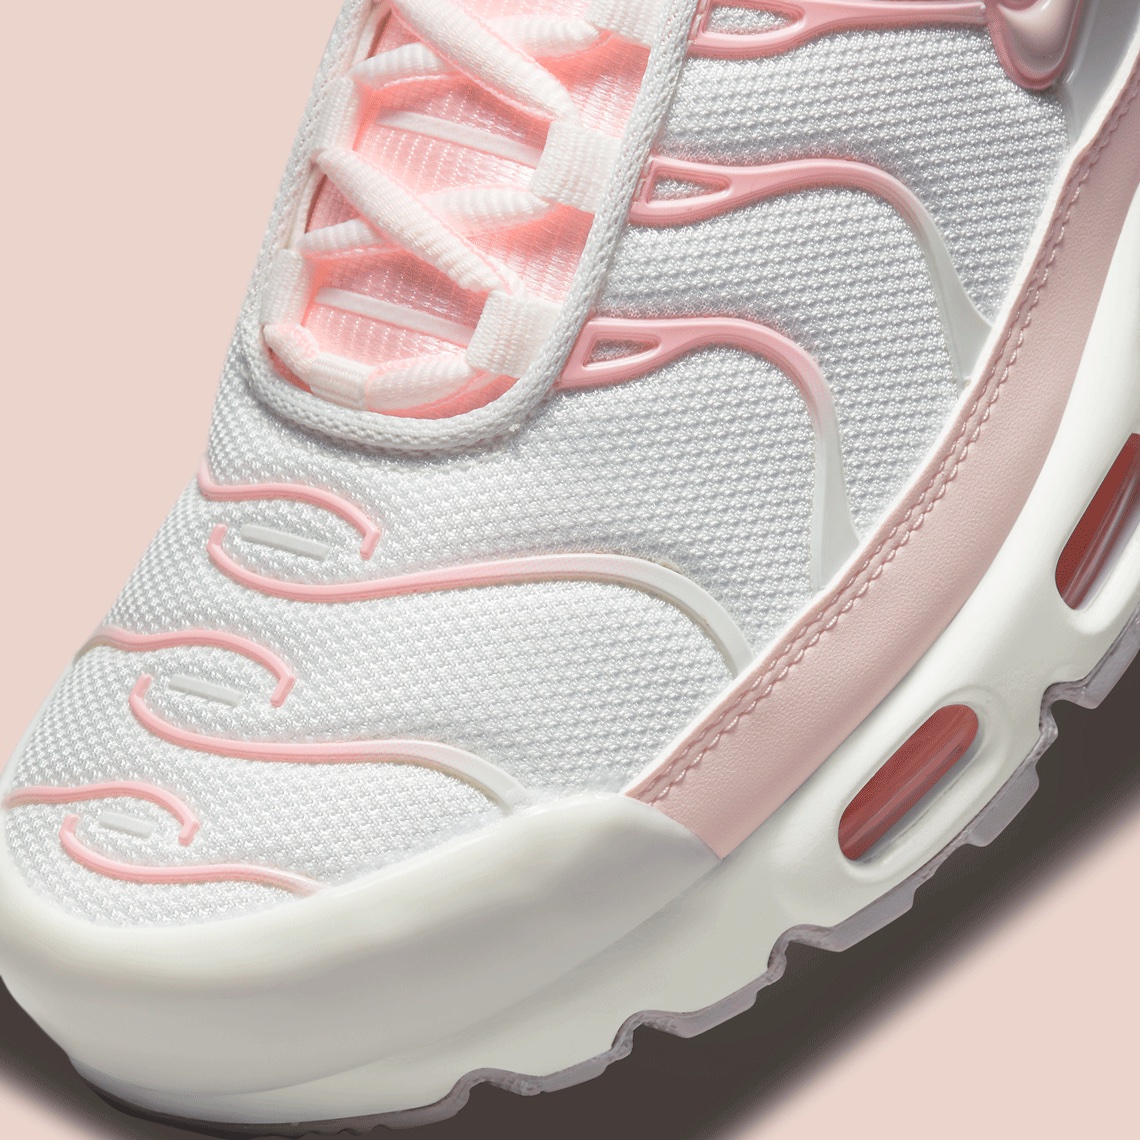 tns white and pink